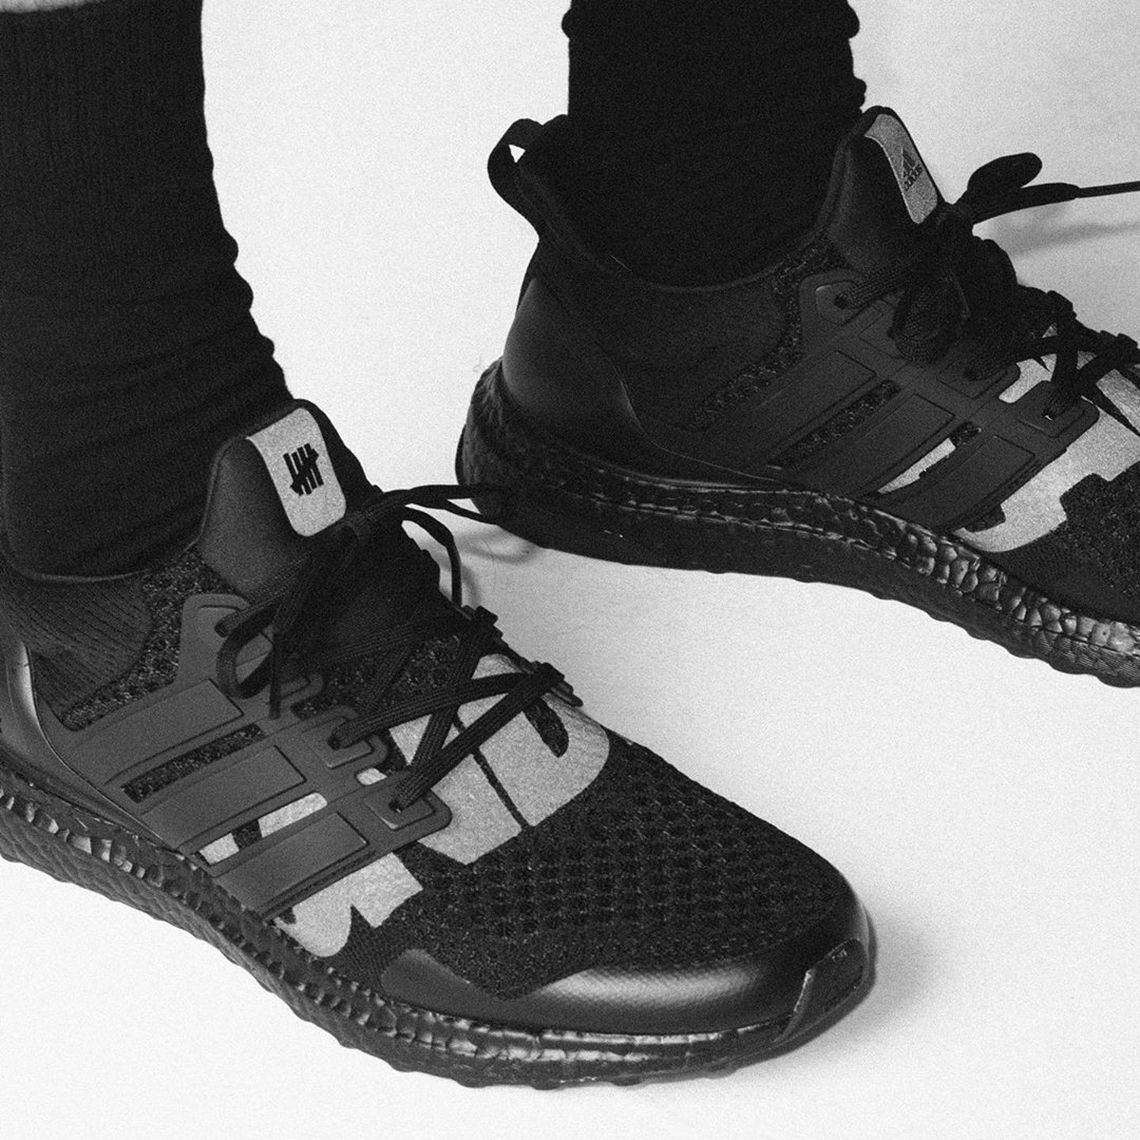 The UNDEFEATED x adidas Ultra BOOST 